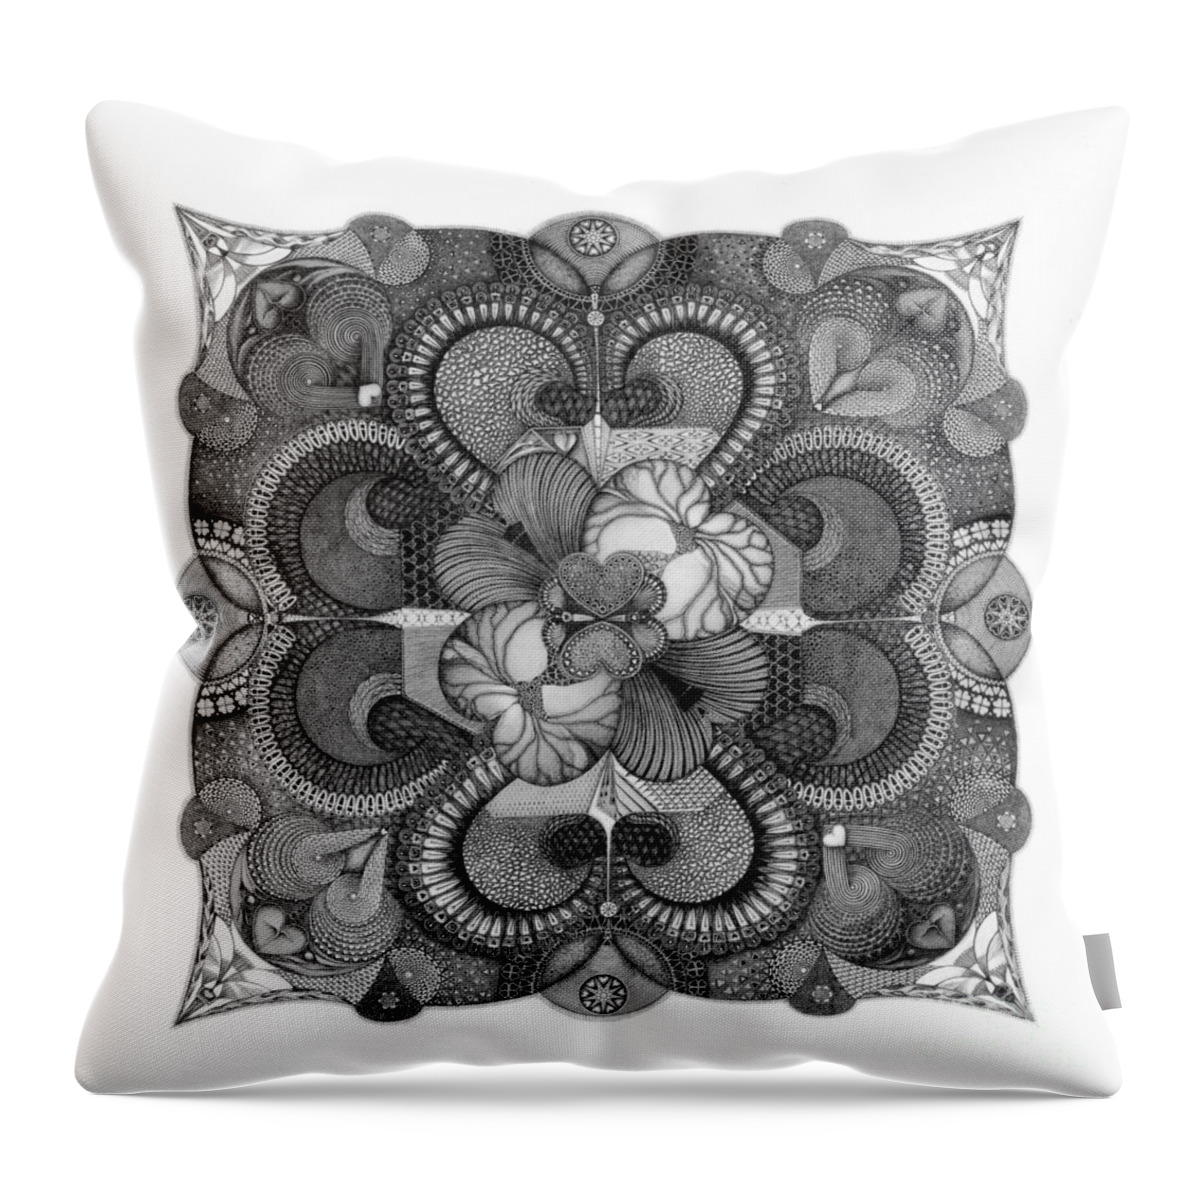  Throw Pillow featuring the drawing Heart to Heart by James Lanigan Thompson MFA